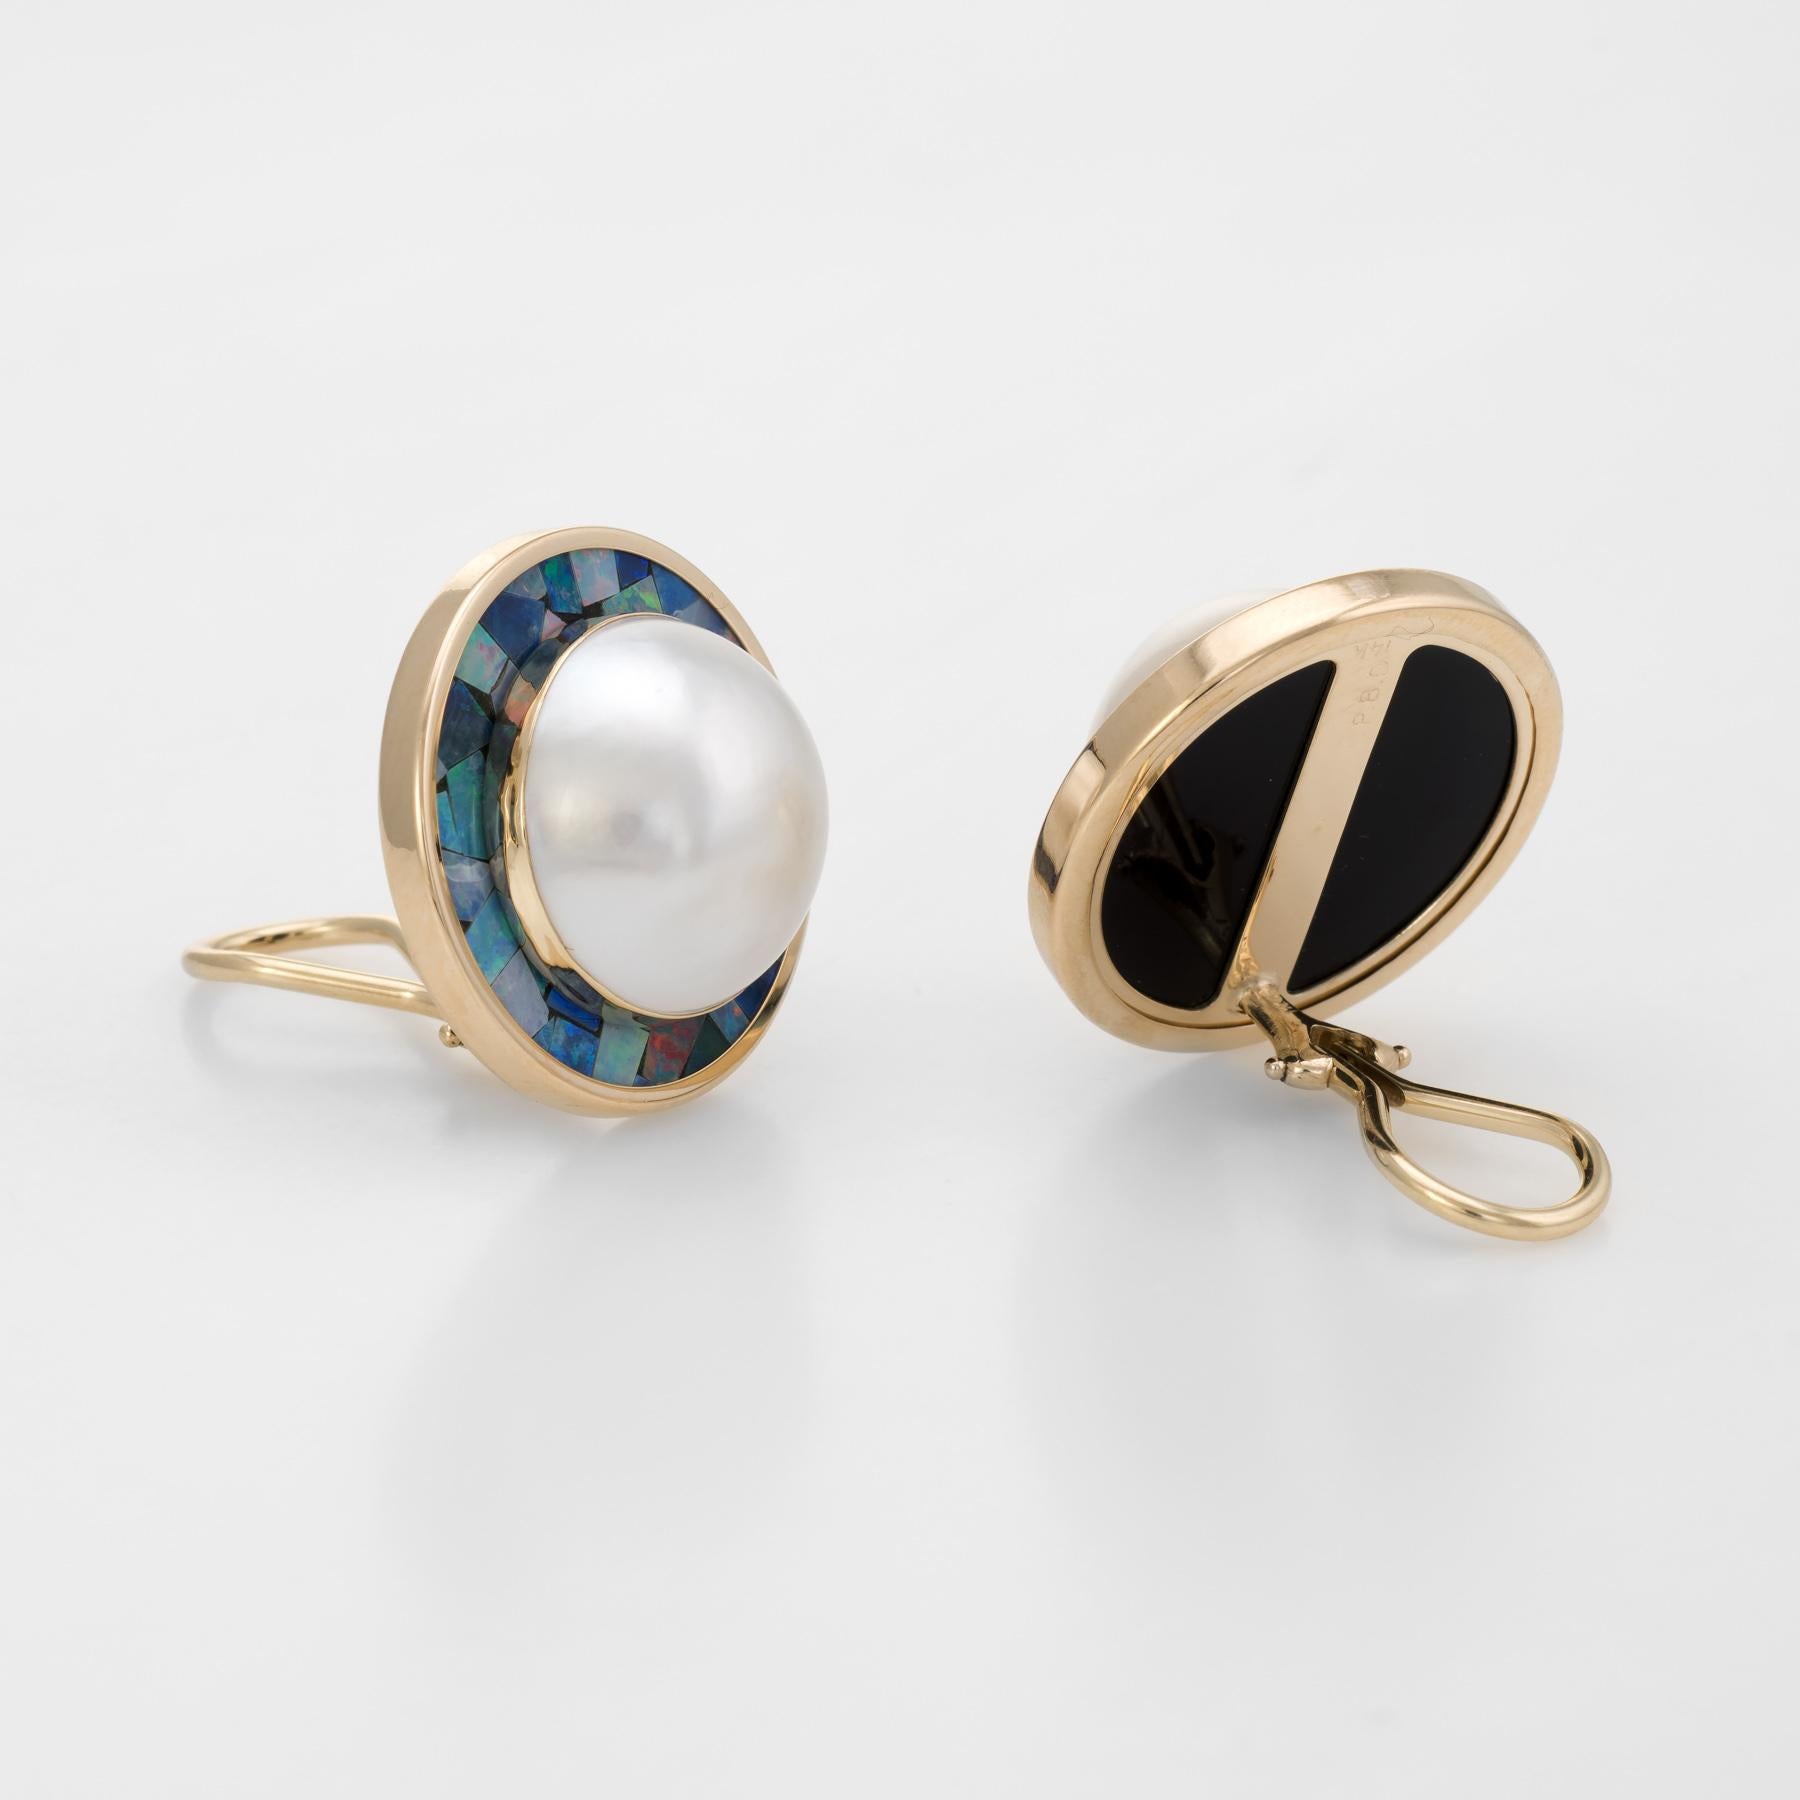 Elegant pair of vintage mabe pearl & inlaid opal earrings (circa 1960s to 1970s), crafted in 14k yellow gold. 

Mabe pearls each measure 16mm. The pearls are well matching and lustrous. Opal doublet chips are inlaid in a mosaic pattern around the